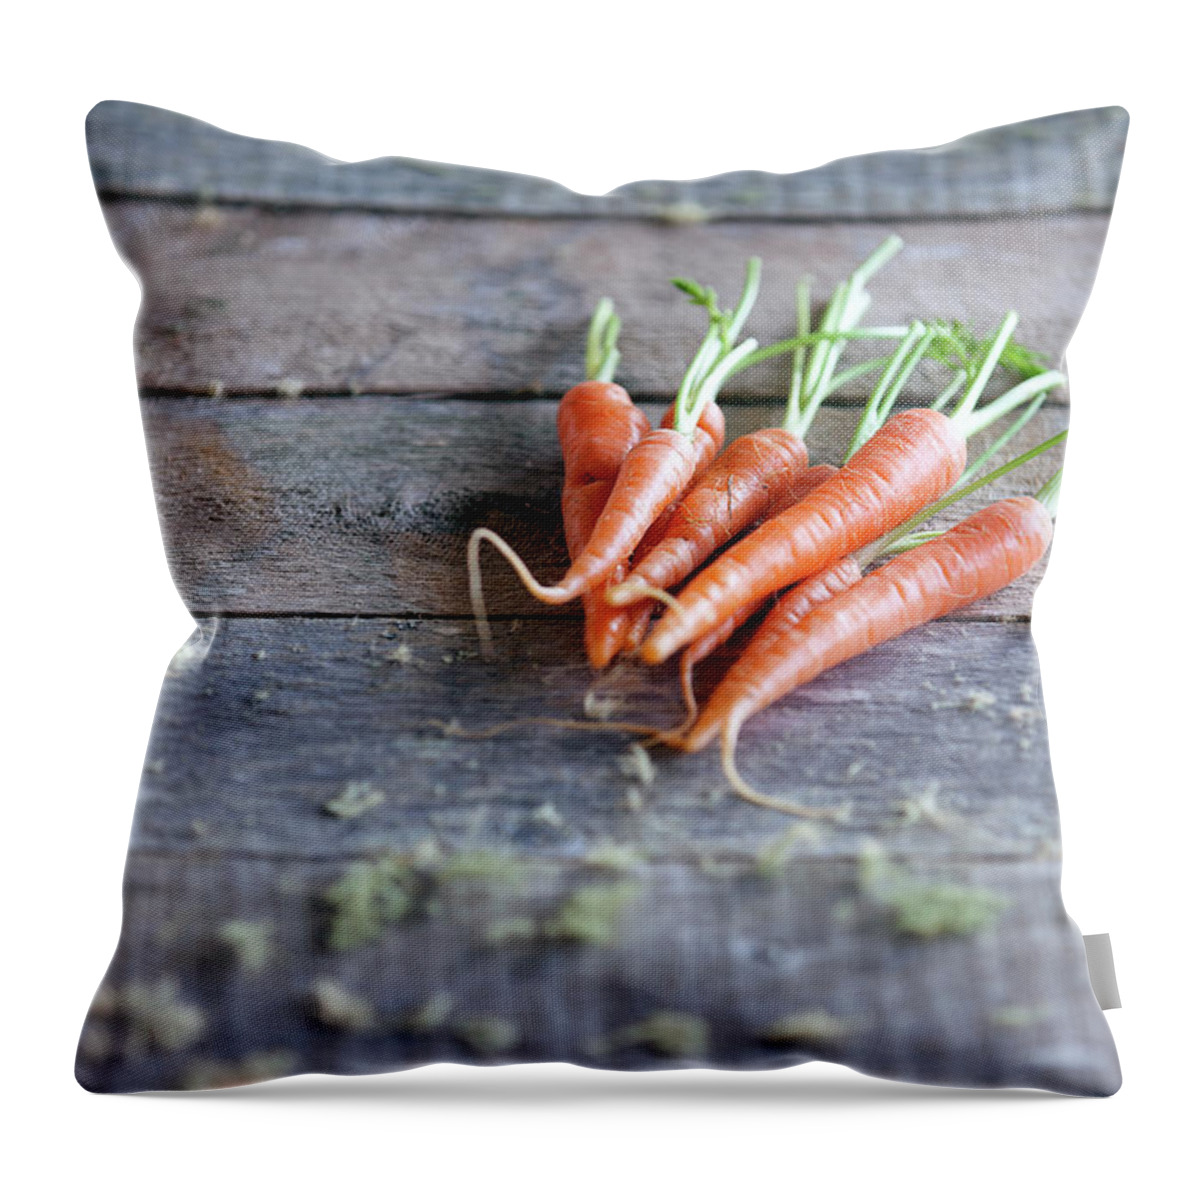 Outdoors Throw Pillow featuring the photograph Baby Carrots On Rustic Table by Devin Hart